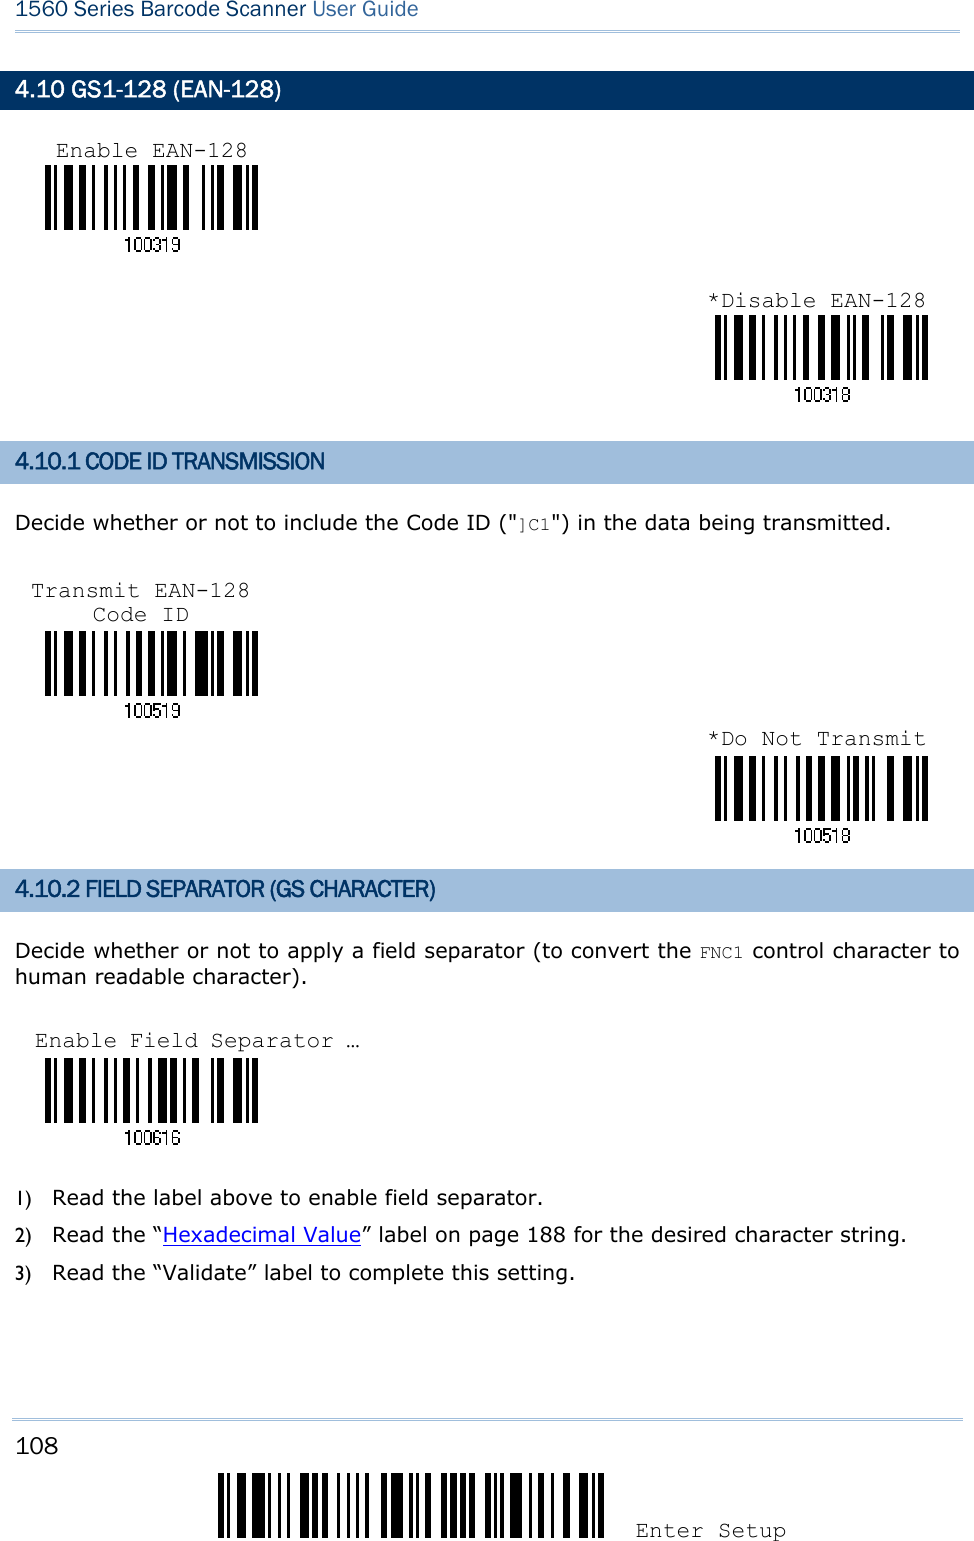 108 Enter Setup 1560 Series Barcode Scanner User Guide  4.10 GS1-128 (EAN-128)   4.10.1 CODE ID TRANSMISSION Decide whether or not to include the Code ID (&quot;]C1&quot;) in the data being transmitted.     4.10.2 FIELD SEPARATOR (GS CHARACTER) Decide whether or not to apply a field separator (to convert the FNC1 control character to human readable character).    1) Read the label above to enable field separator. 2) Read the “Hexadecimal Value” label on page 188 for the desired character string.   3) Read the “Validate” label to complete this setting. Enable EAN-128*Disable EAN-128Transmit EAN-128 Code ID *Do Not TransmitEnable Field Separator … 